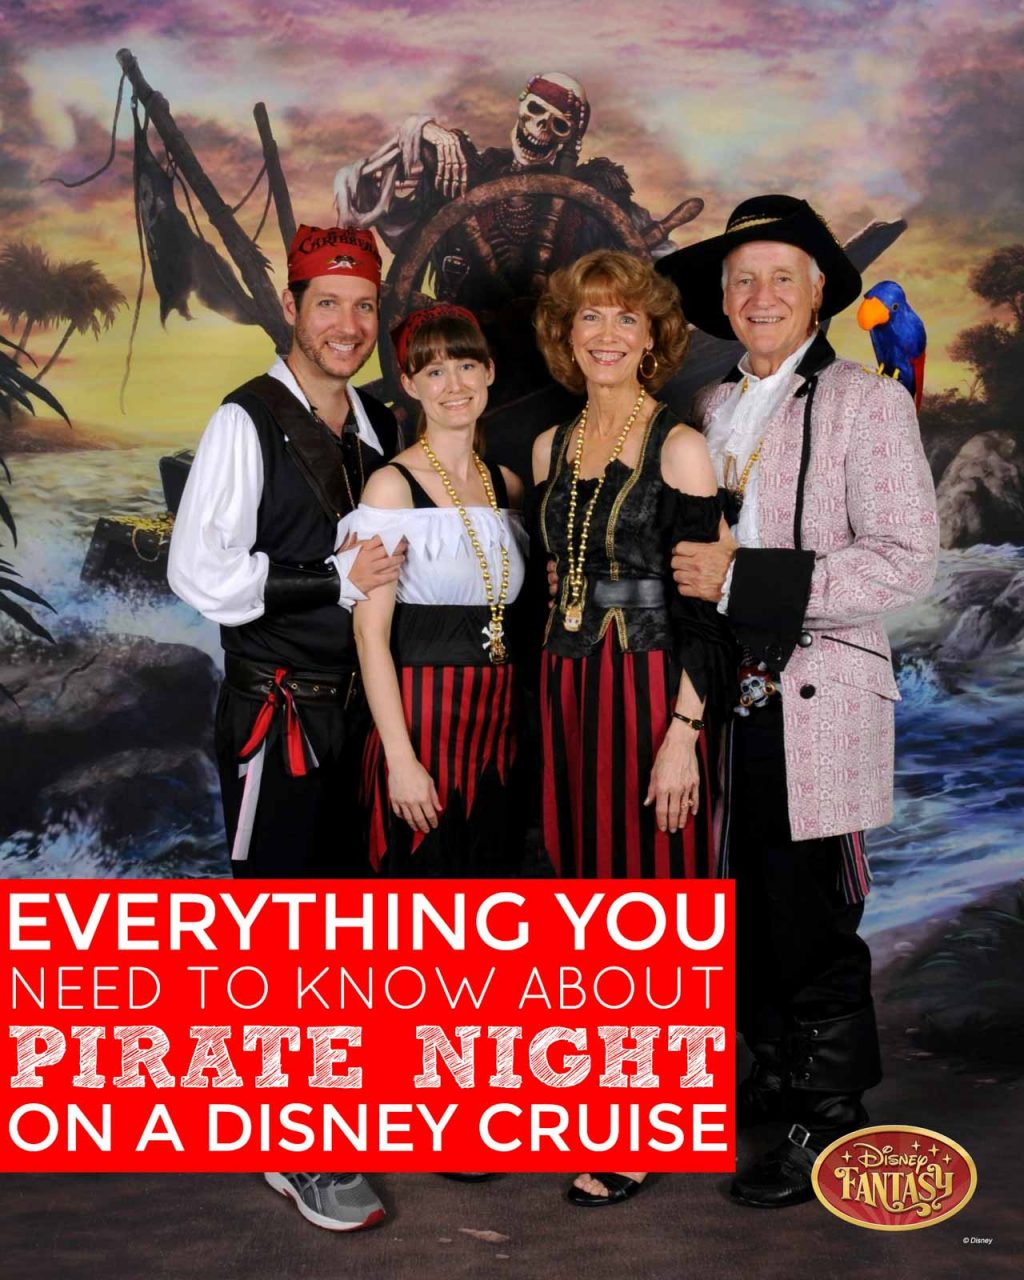 A family standing together dressed as pirates on a Disney cruise. 